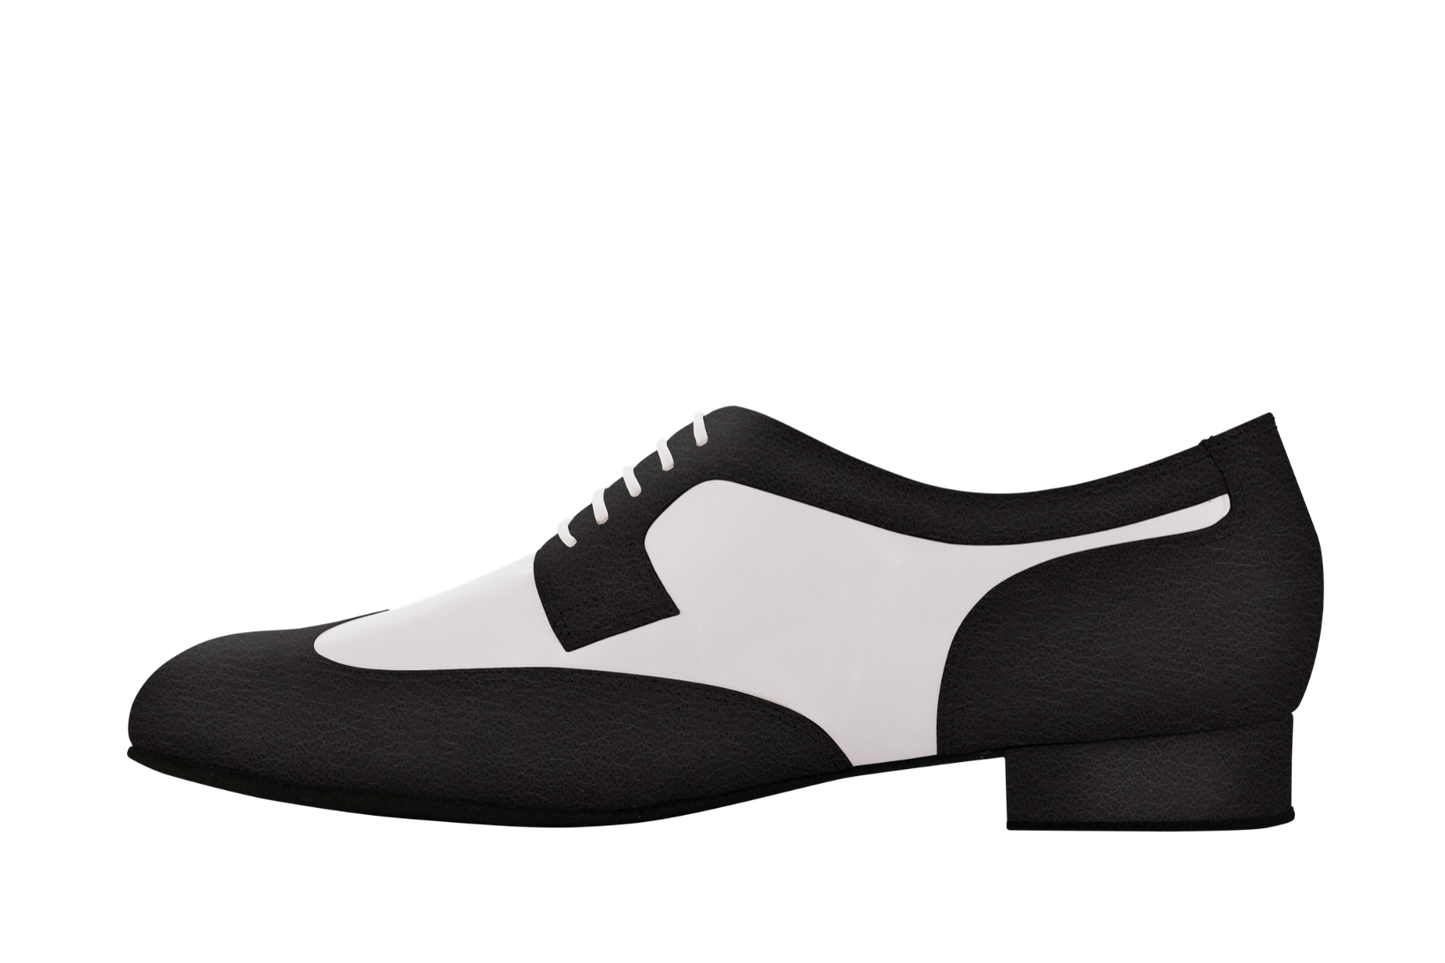 Dance Naturals 125 Castello Men's Ballroom Shoe Available in Black/White Leather or Blue/White Dots Leather